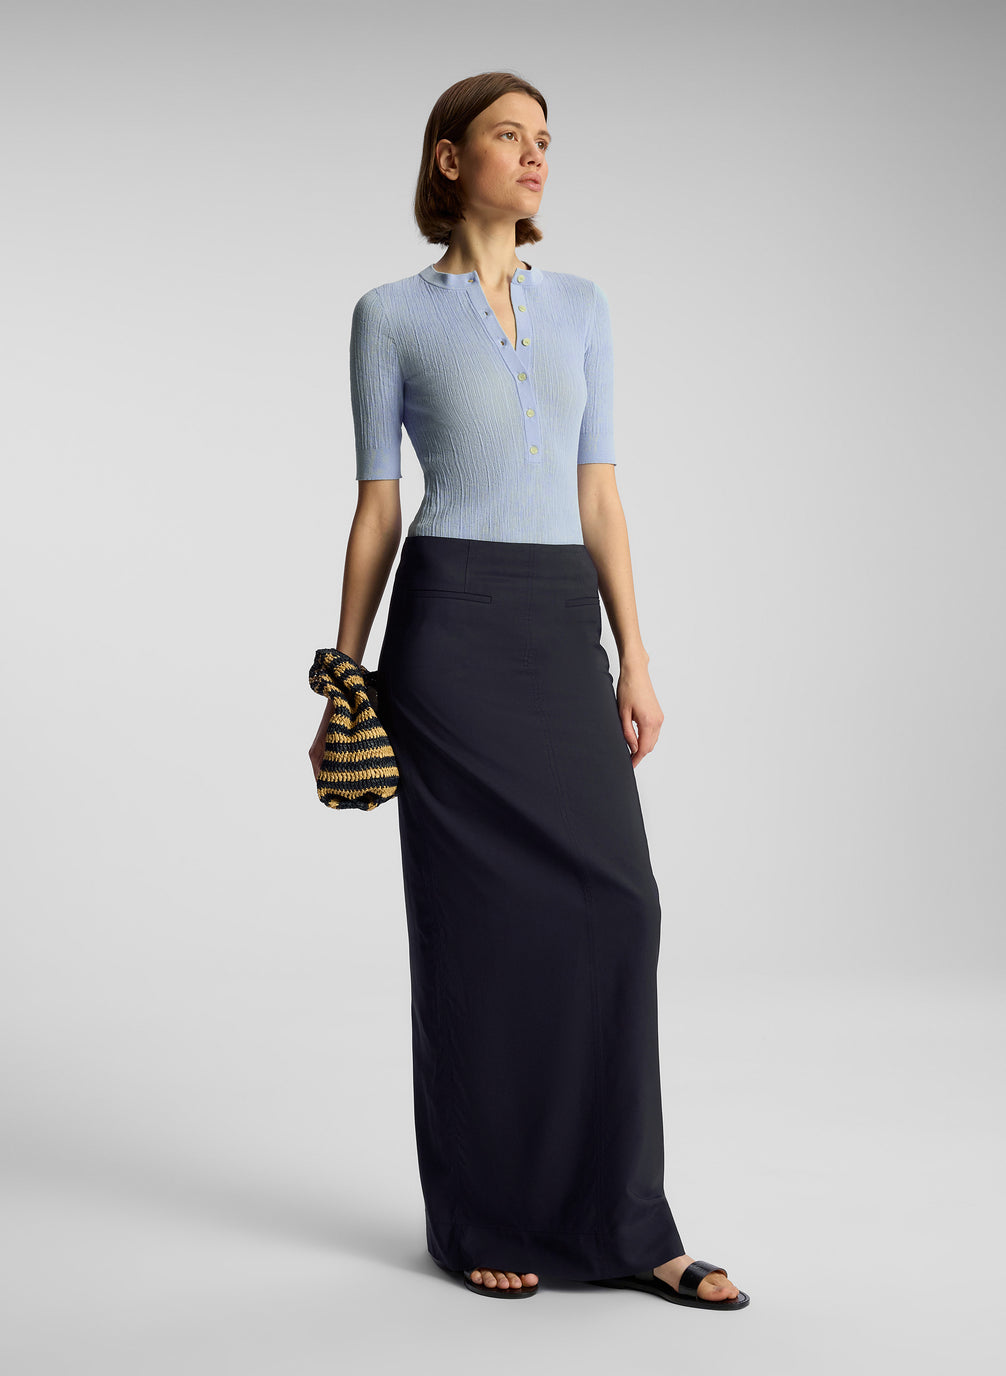 side  view of woman wearing light blue shirt and navy blue maxi skirt